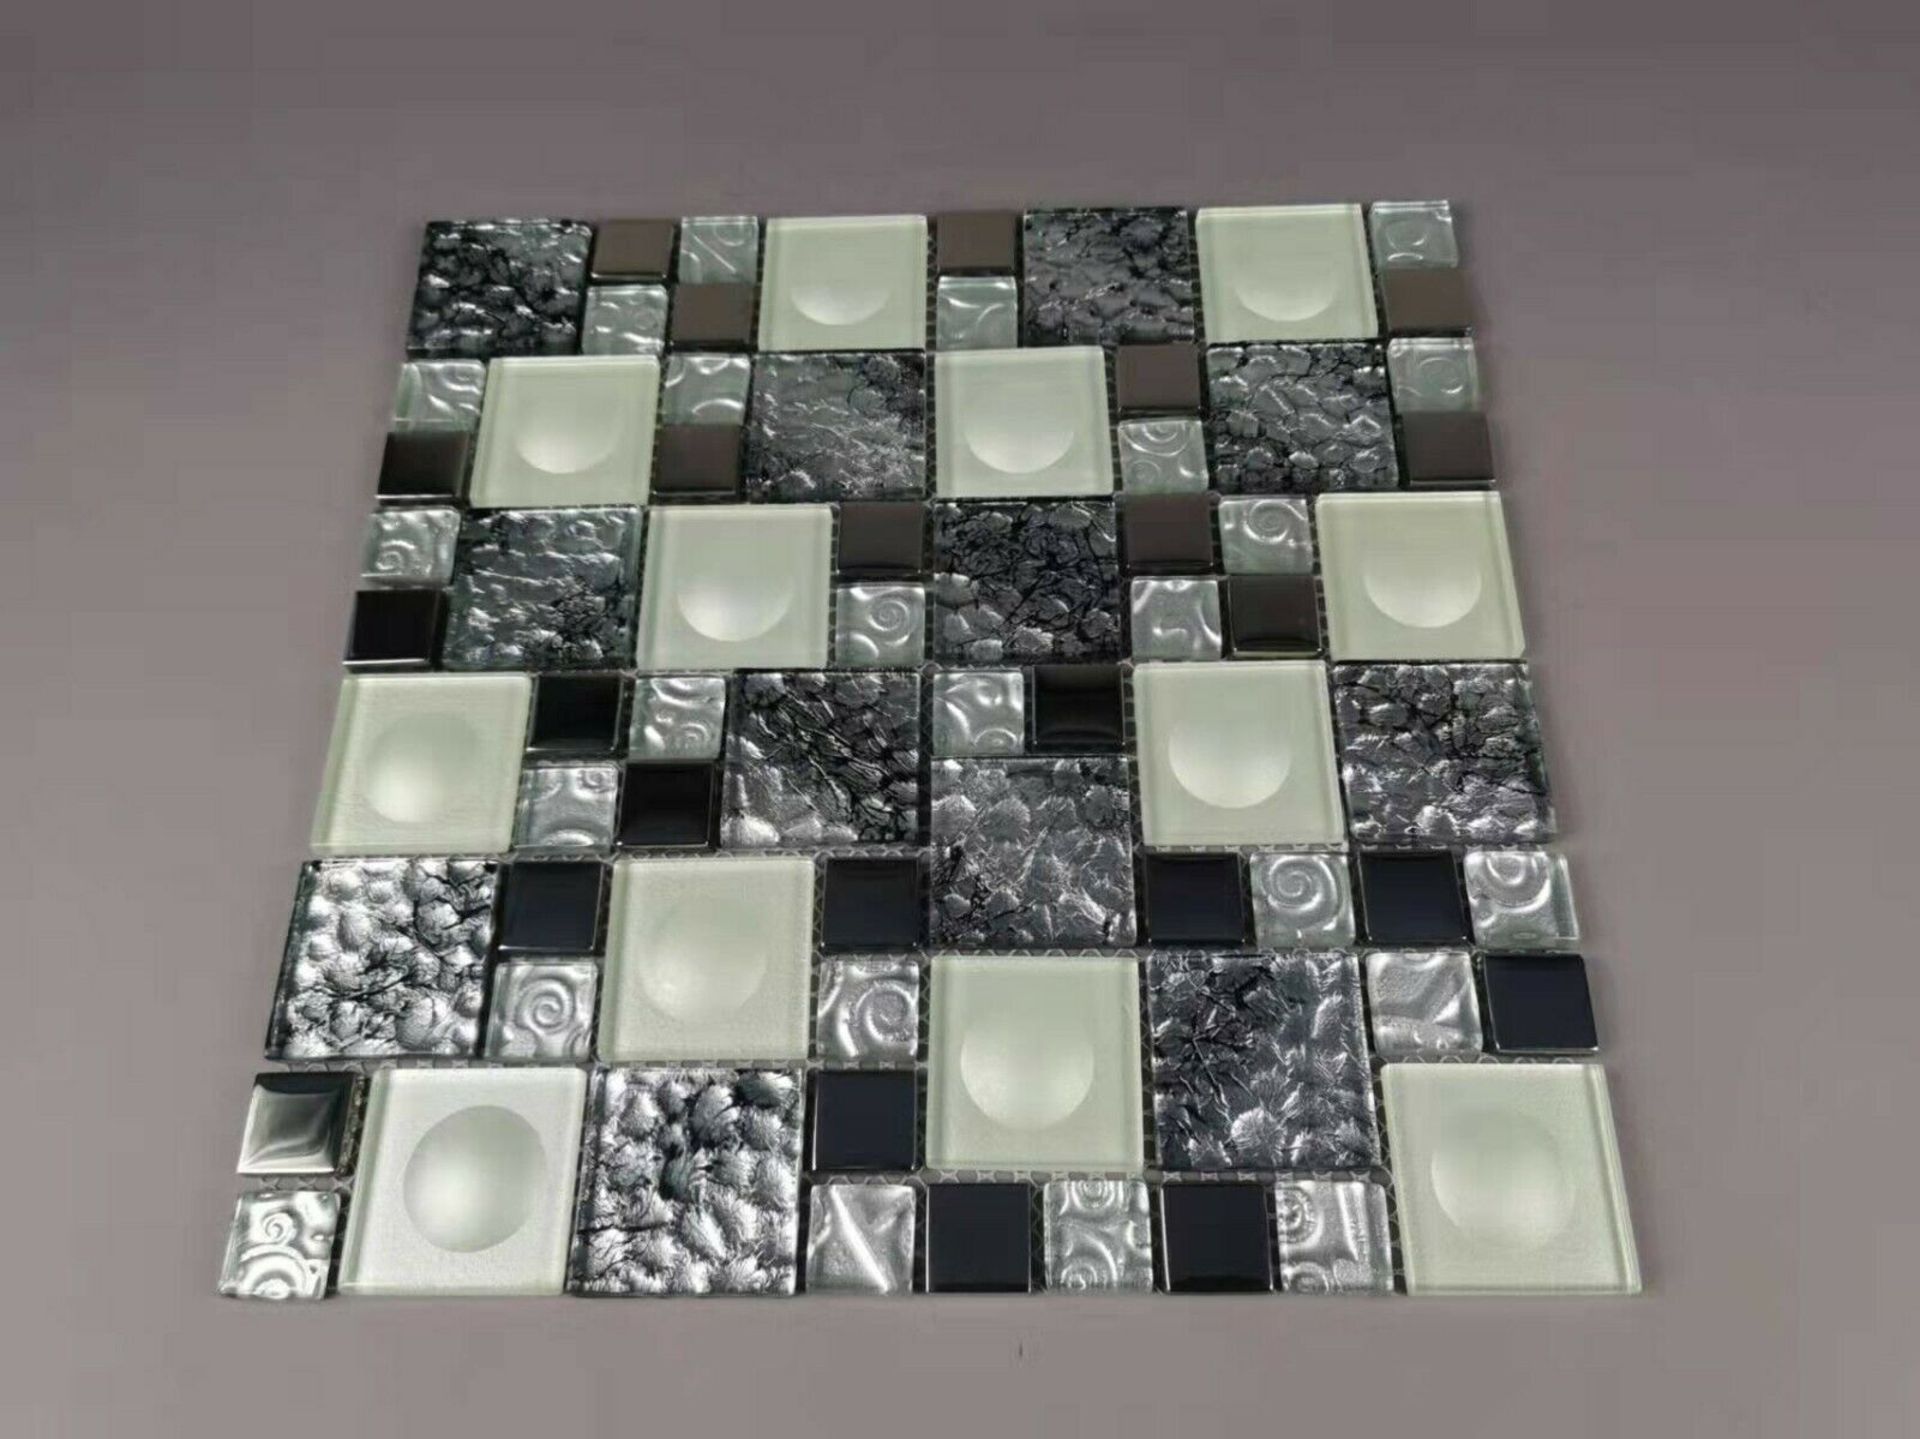 10 Square Metres - High Quality Glass/Stainless Steel Mosaic Tiles - Image 3 of 4